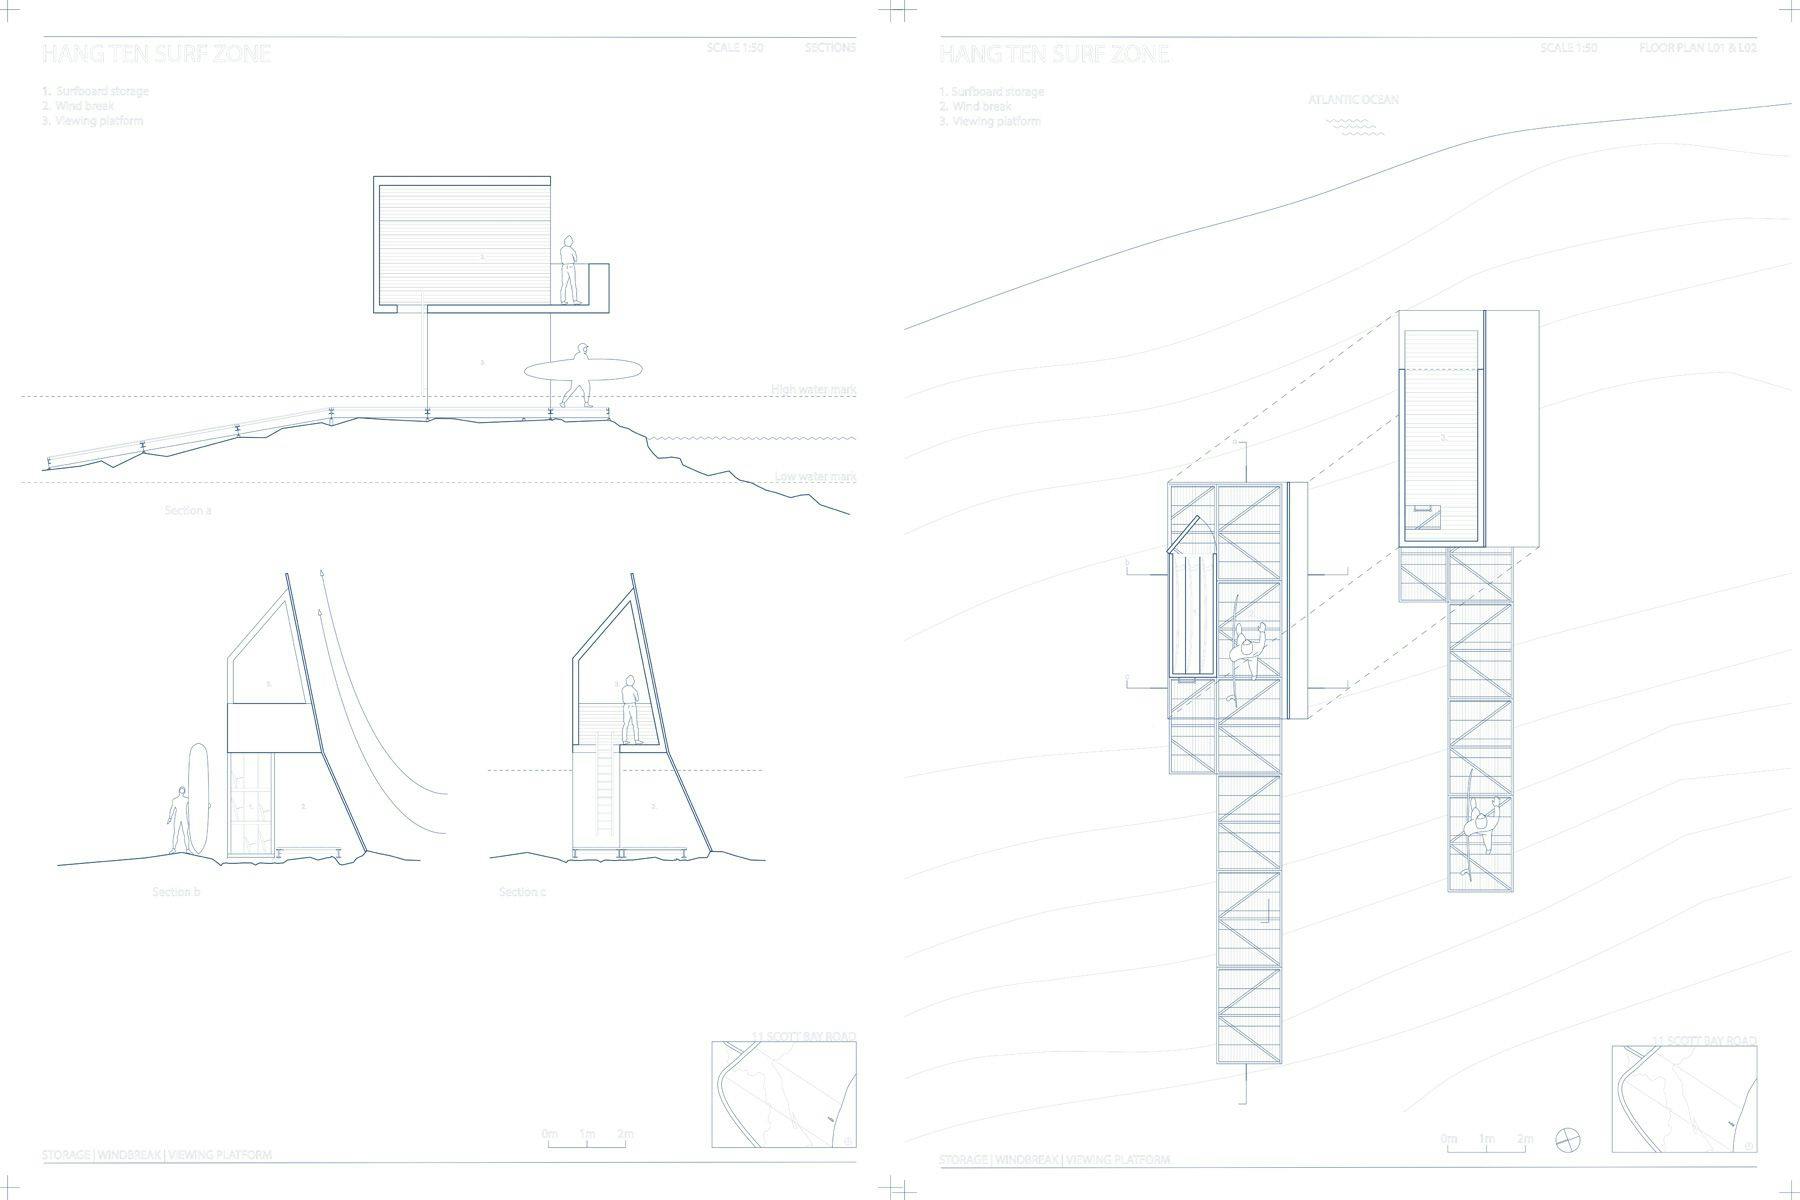 plan and elevation views of a surfboard storage and surf check structure by john fache